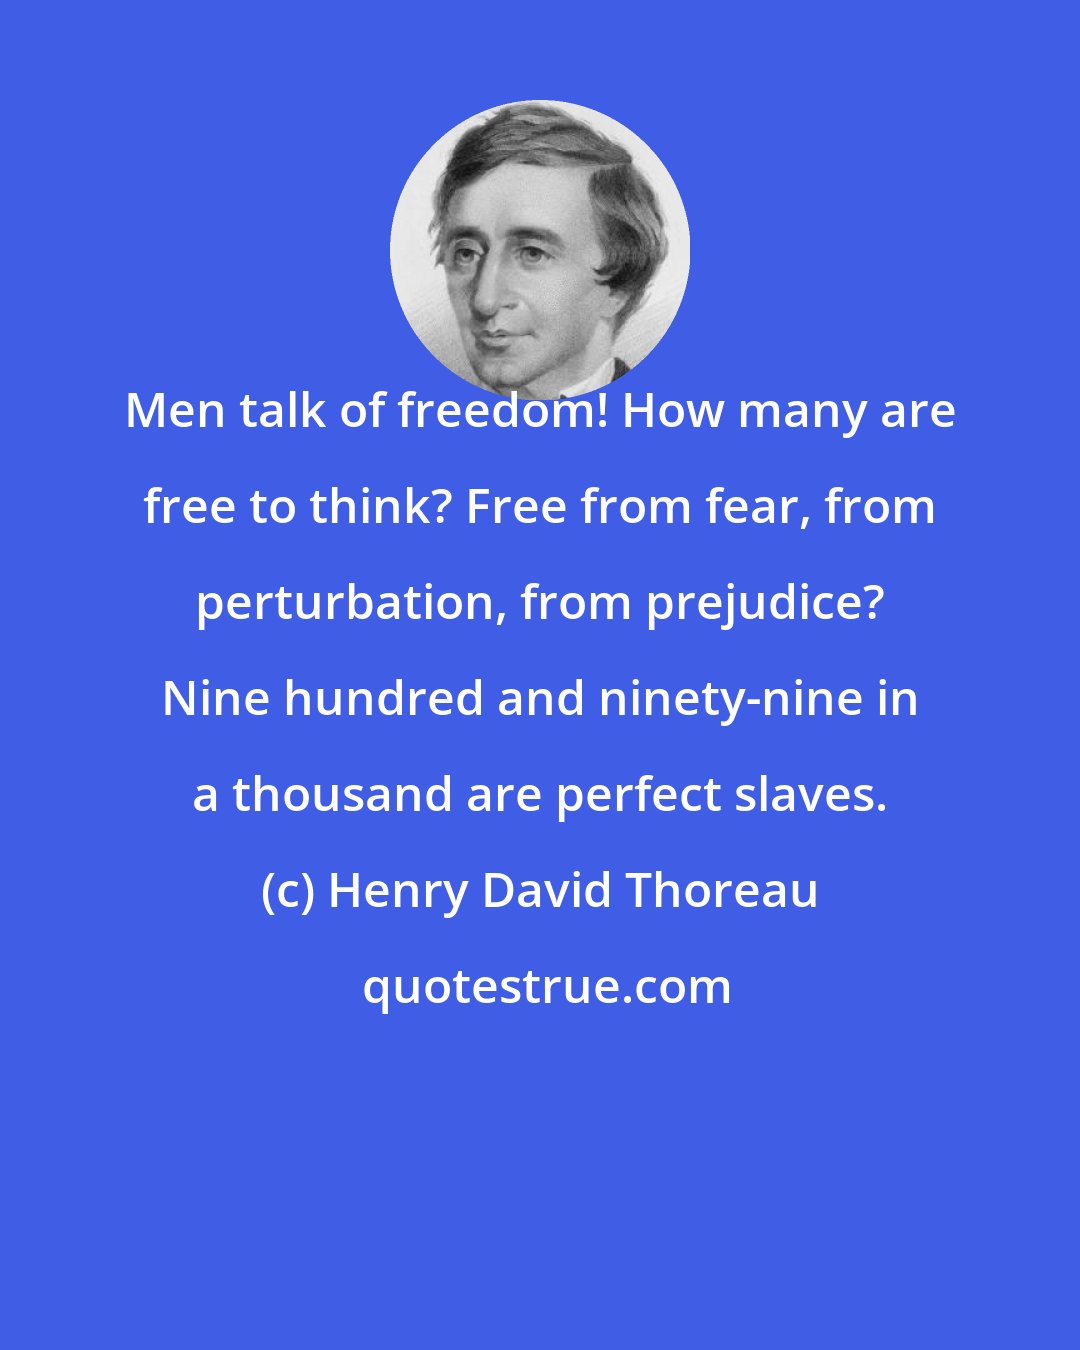 Henry David Thoreau: Men talk of freedom! How many are free to think? Free from fear, from perturbation, from prejudice? Nine hundred and ninety-nine in a thousand are perfect slaves.